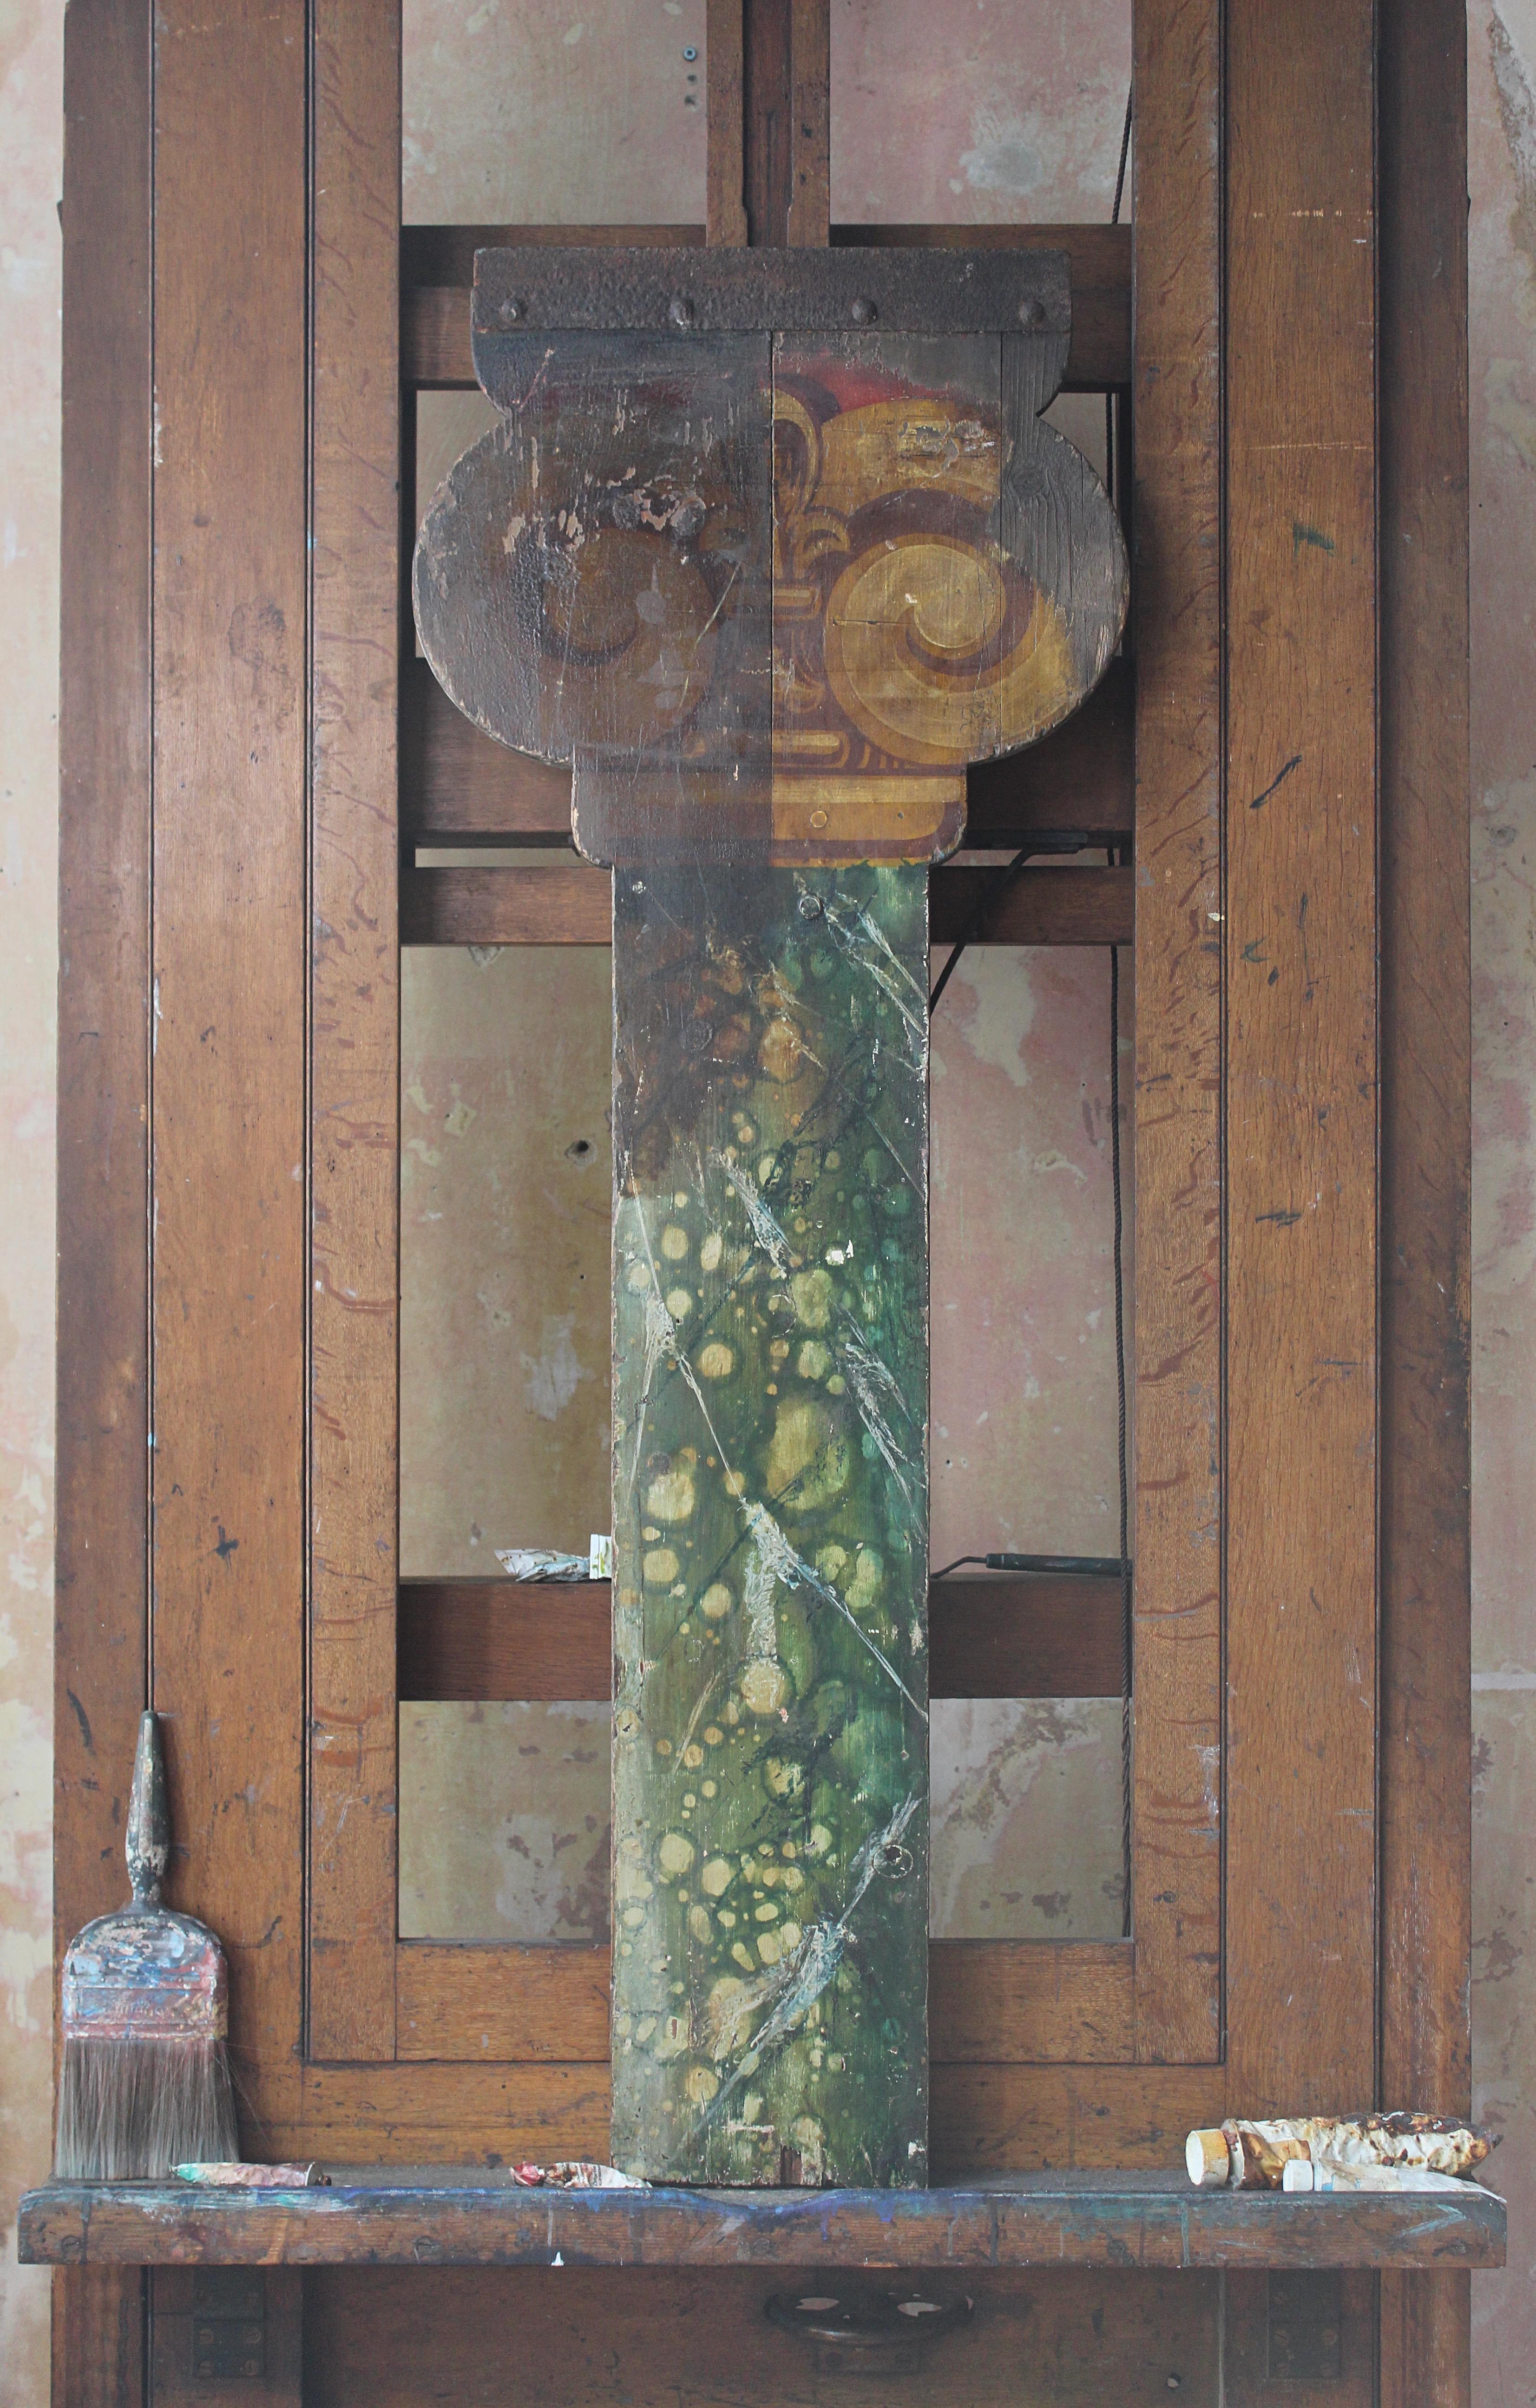 A very decorative pine panel in the form of an architectural corinthian column.

Painted by the infamous fairground artist Fred Fowle in the early part of the 20th century.

Age related losses, craquelure to the surface giving the piece a great